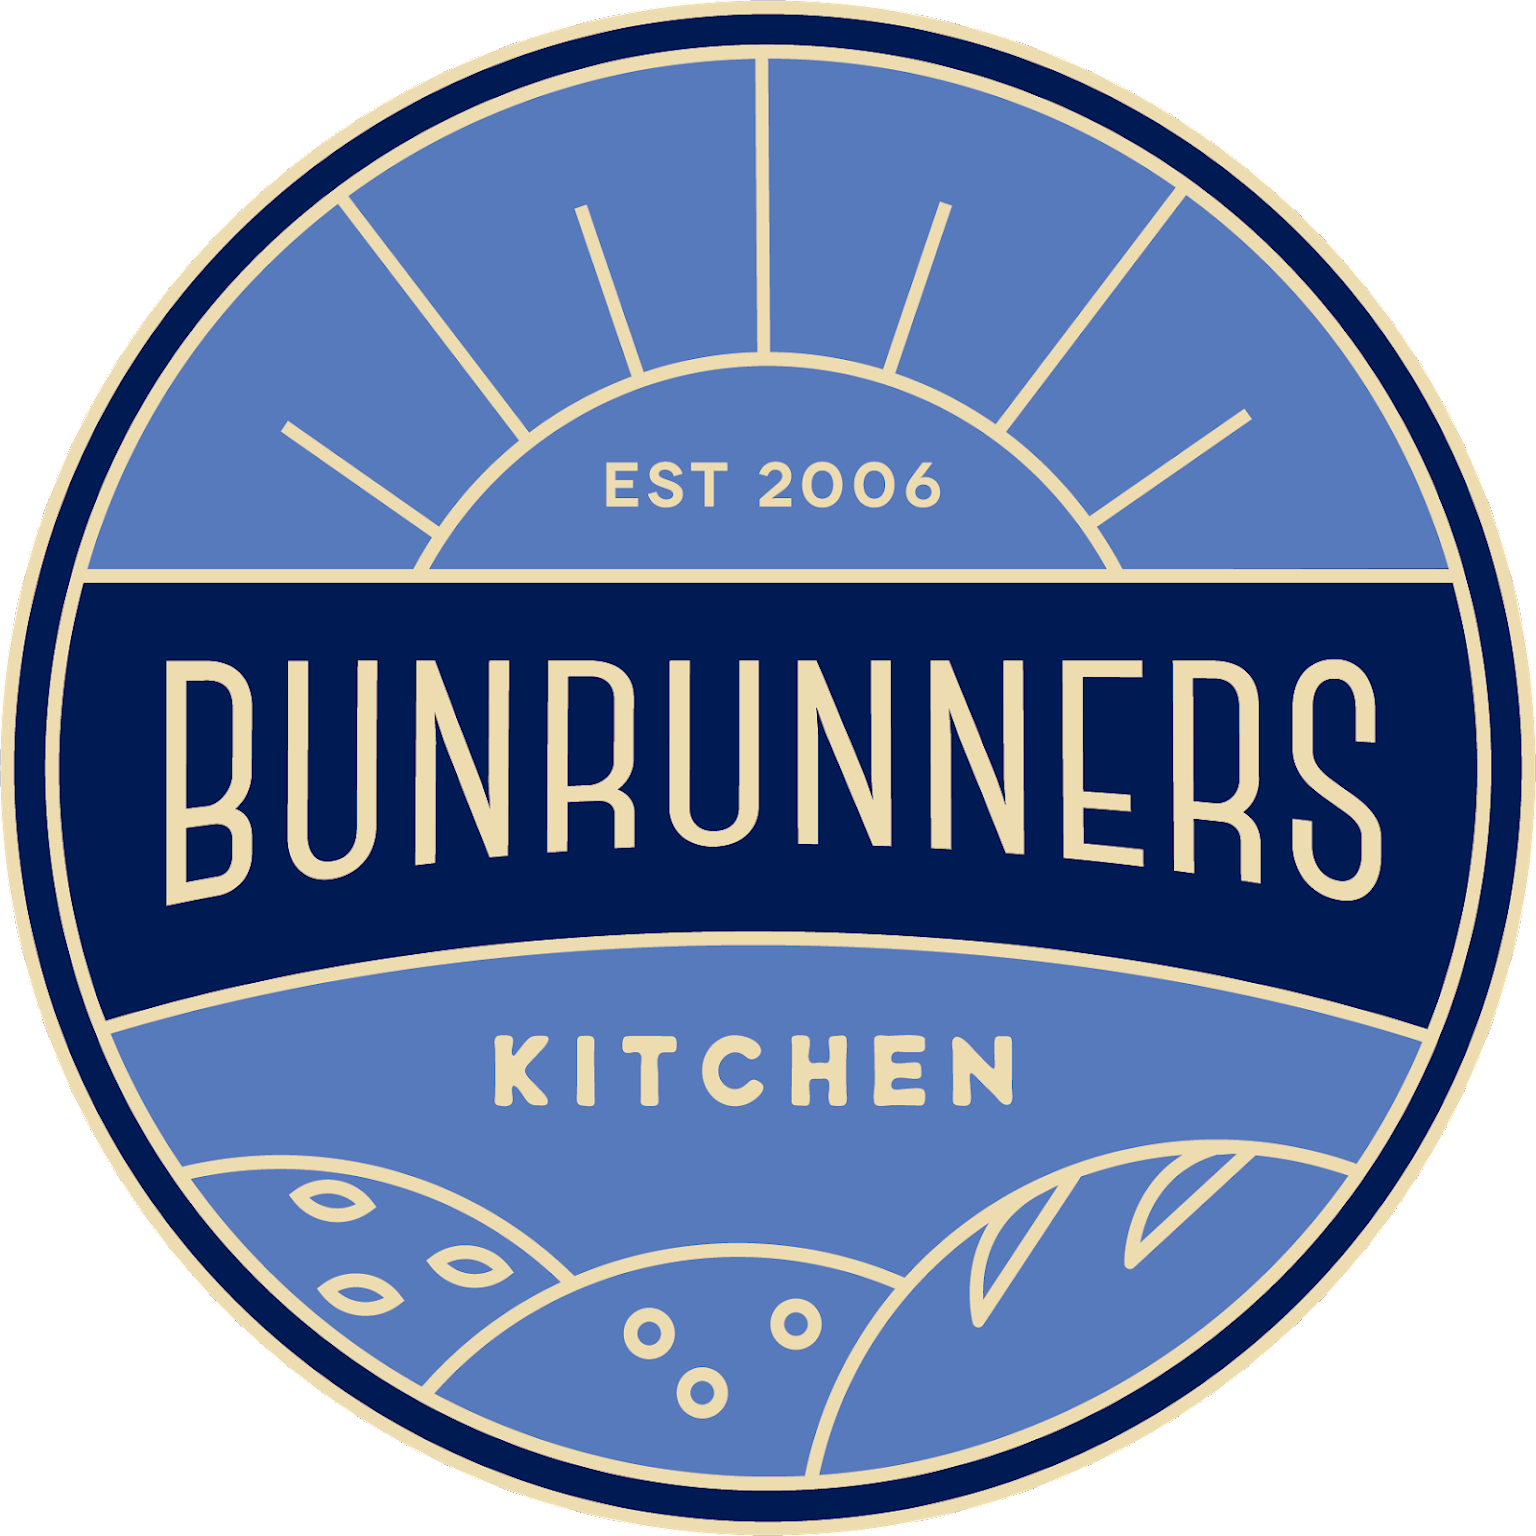 Bunrunners Cafe